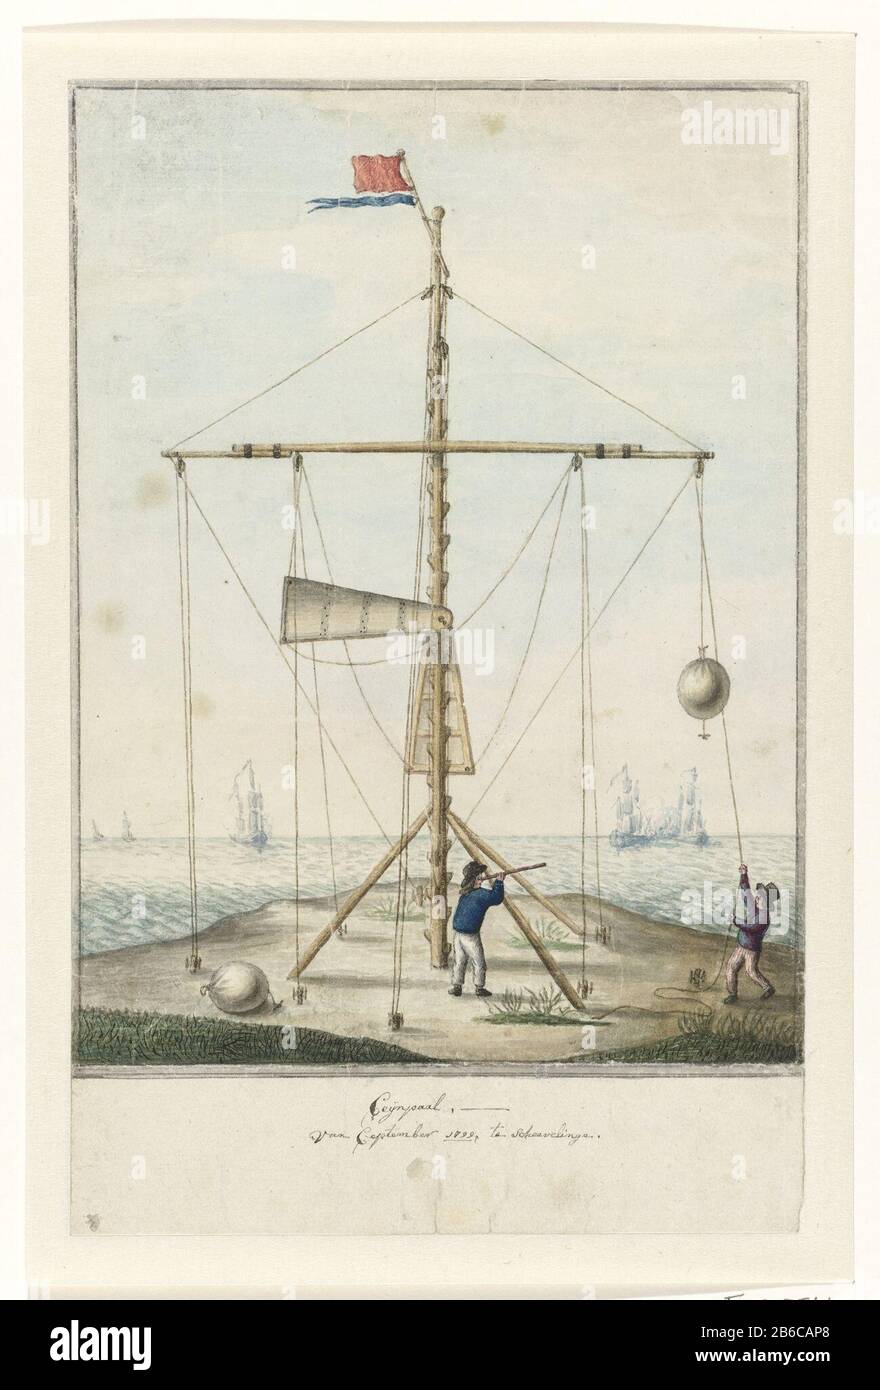 Bataafse coast telegraph, 1799 Seijnpaal, of September 1799, in Scheveningen (title object) Batavian coast telegraph, semaphore or semaphore, drawn up on the coast at Scheveningen, Sept. 1799. Manufacturer : artist: anonymous place manufacture: Netherlands Date: 1799 Physical features: pen in brown ink color material: paper Dimensions: sheet: h 320 mm × W 205 mm Subject: semaphoreBataafse Republic Anglo-Russian expedition to North Holland When: 1799-09 - 1799-09 Stock Photo